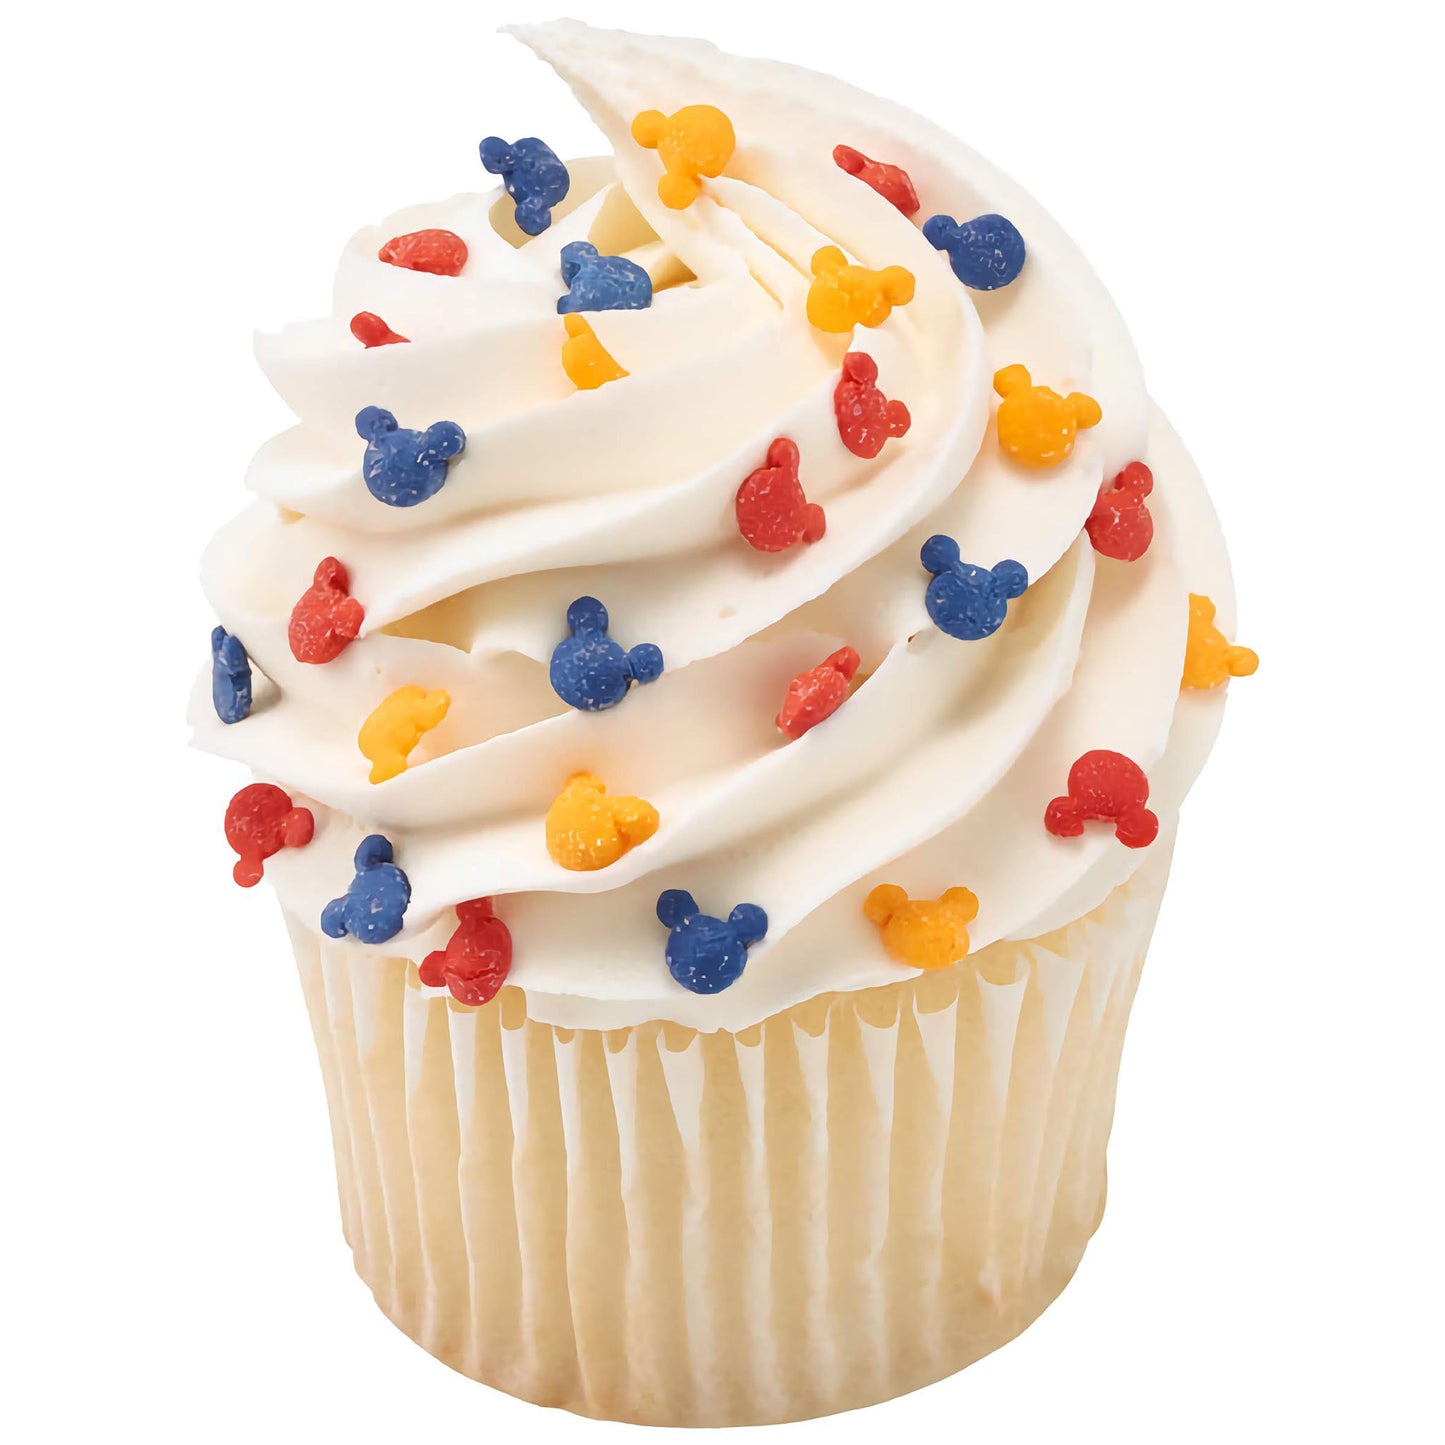 A cupcake with creamy white frosting, decorated with Mickey Mouse-shaped quin sprinkles in red, blue, and yellow, adding a fun and whimsical touch to the dessert.